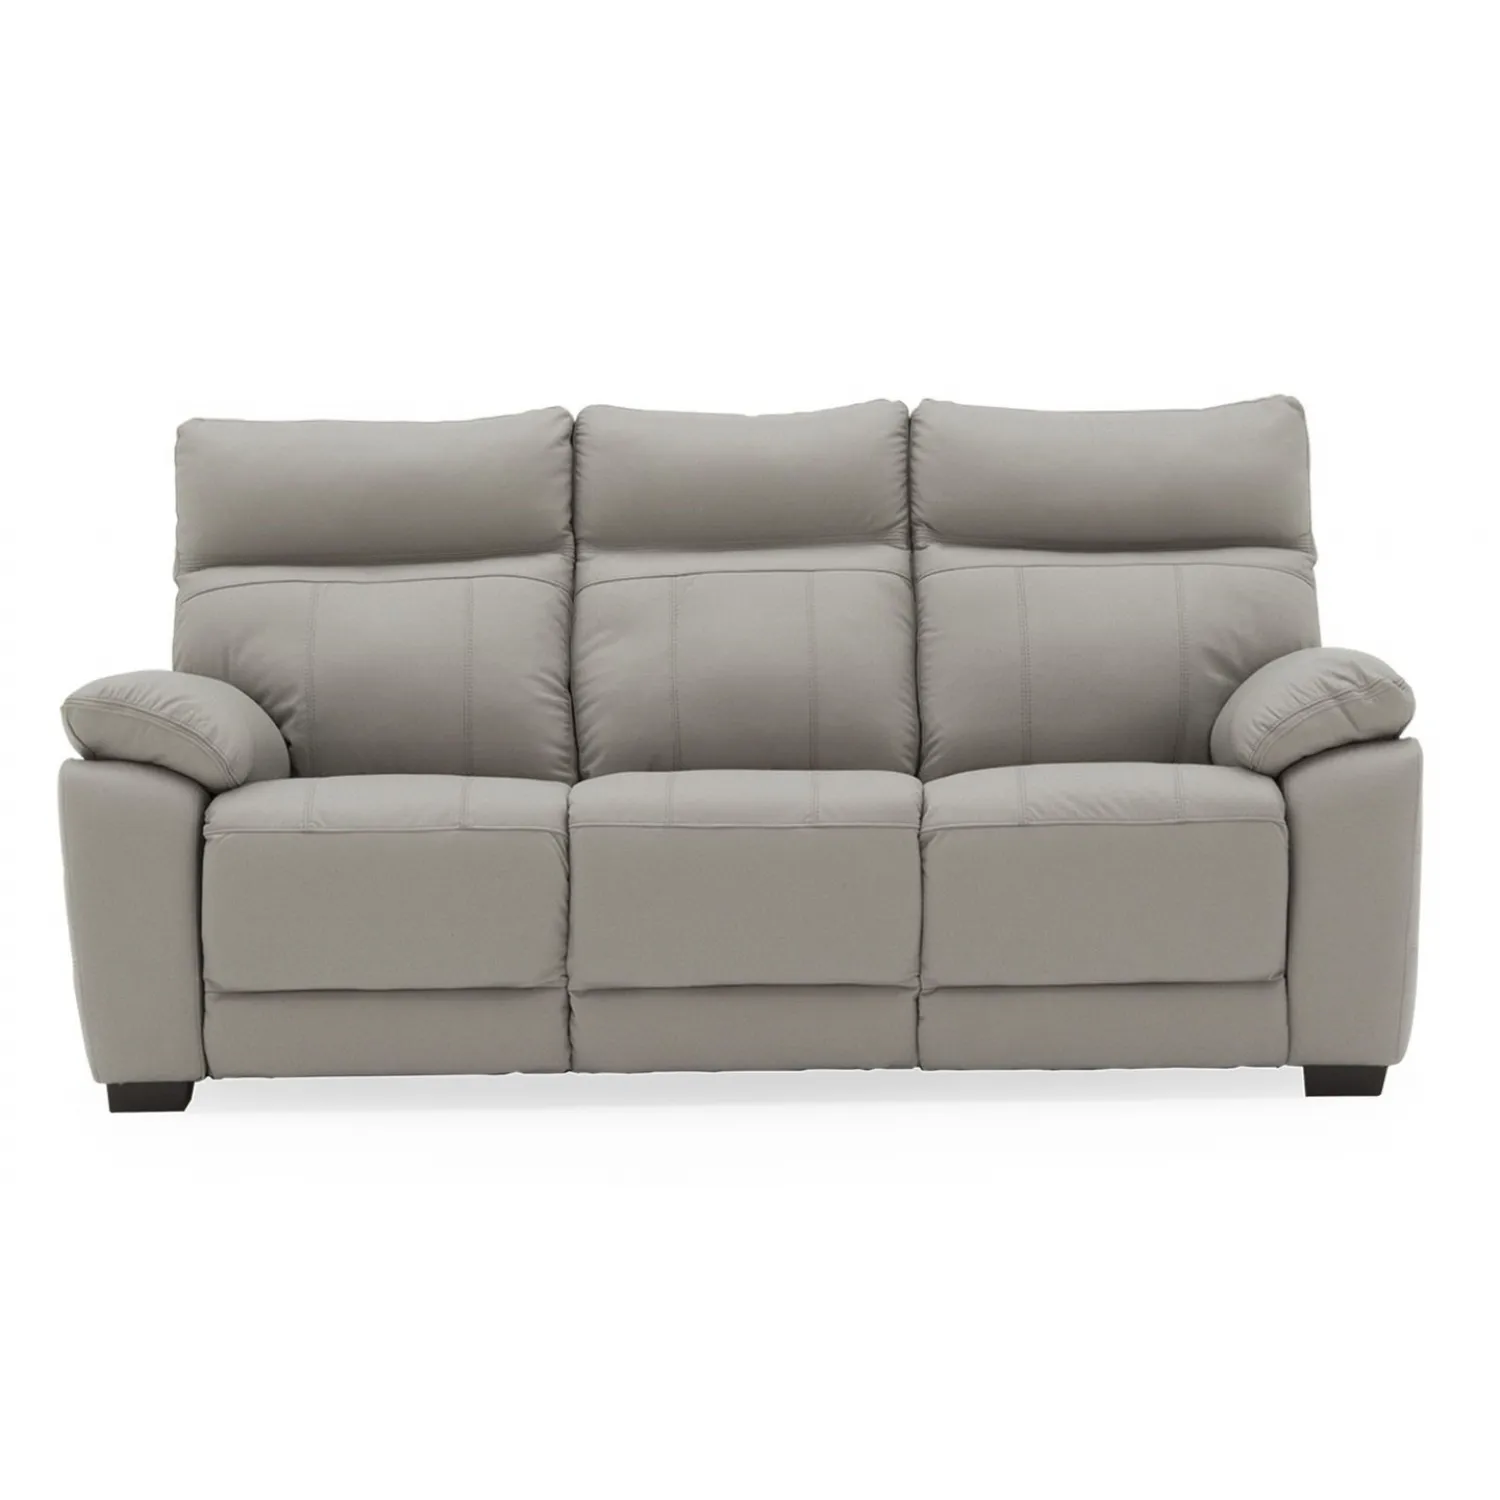 Light Grey Leather 3 Seater Large Sofa 200cm Wide